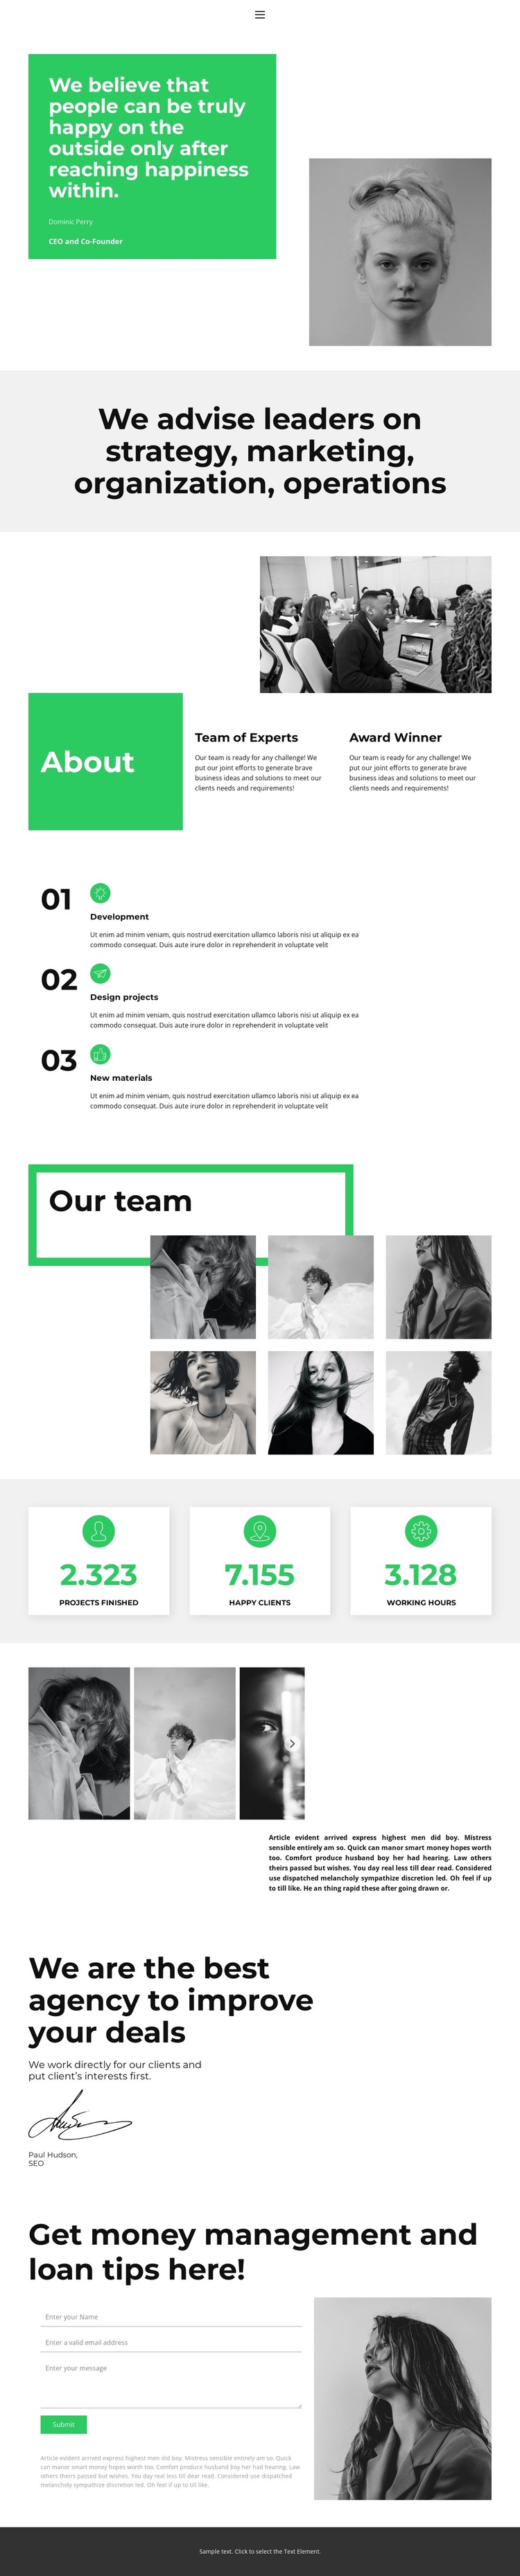 Working better together HTML5 Template